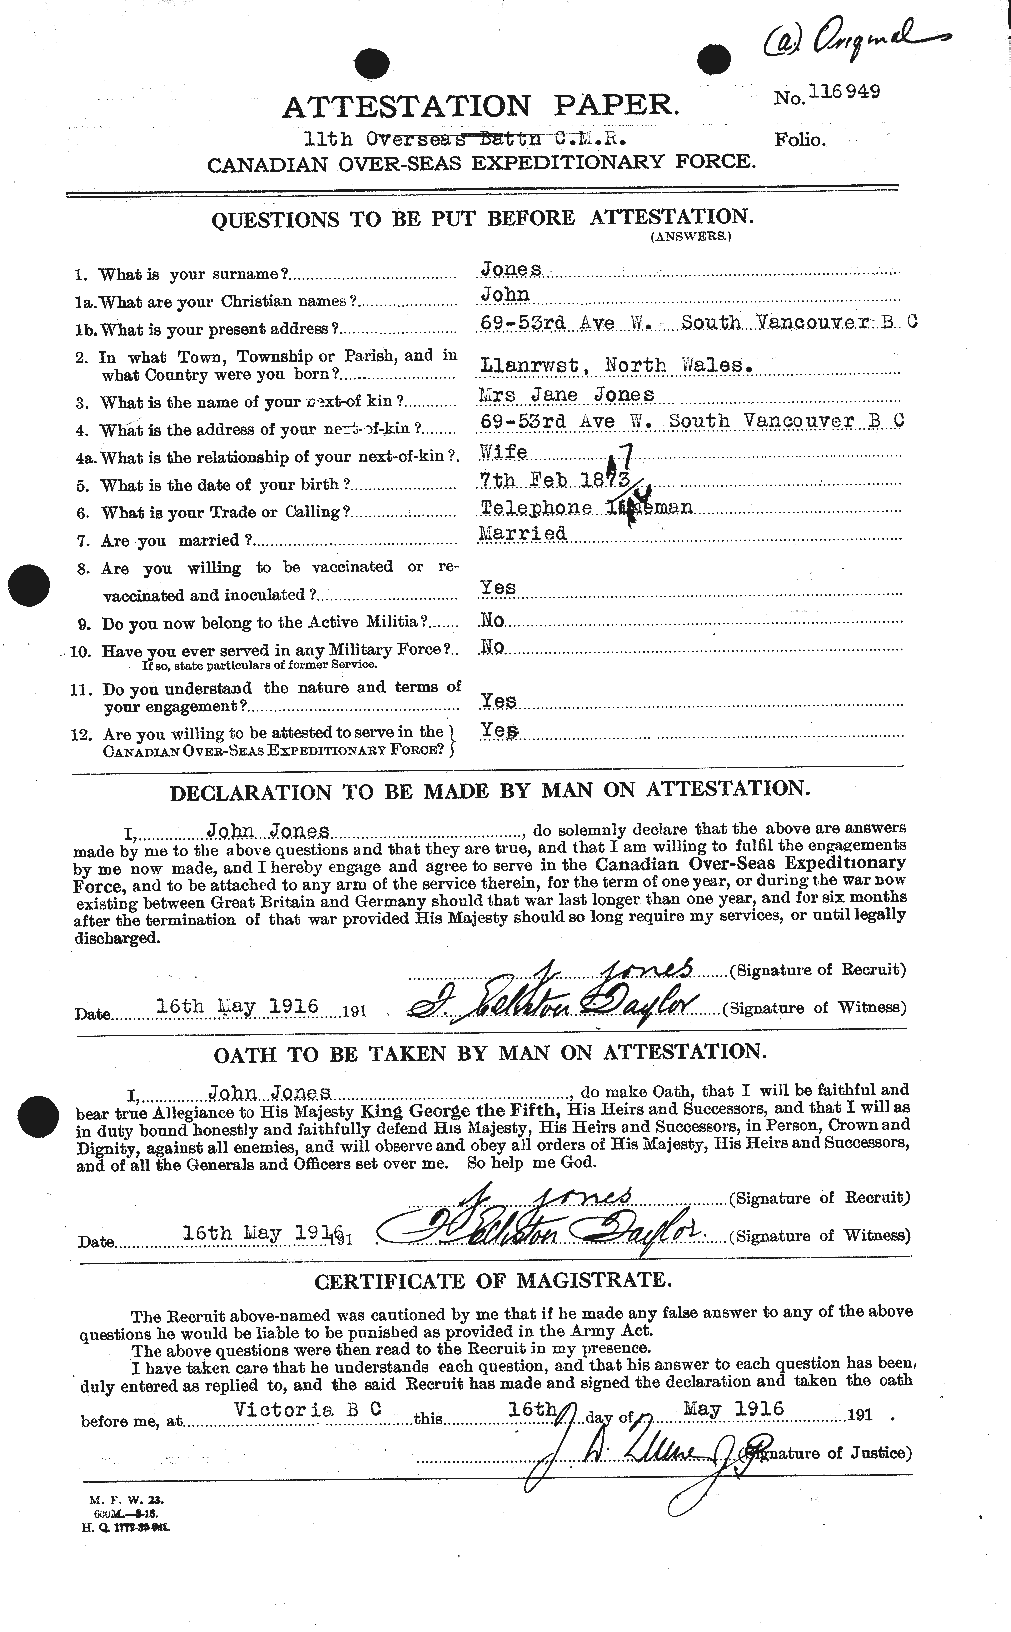 Personnel Records of the First World War - CEF 427479a